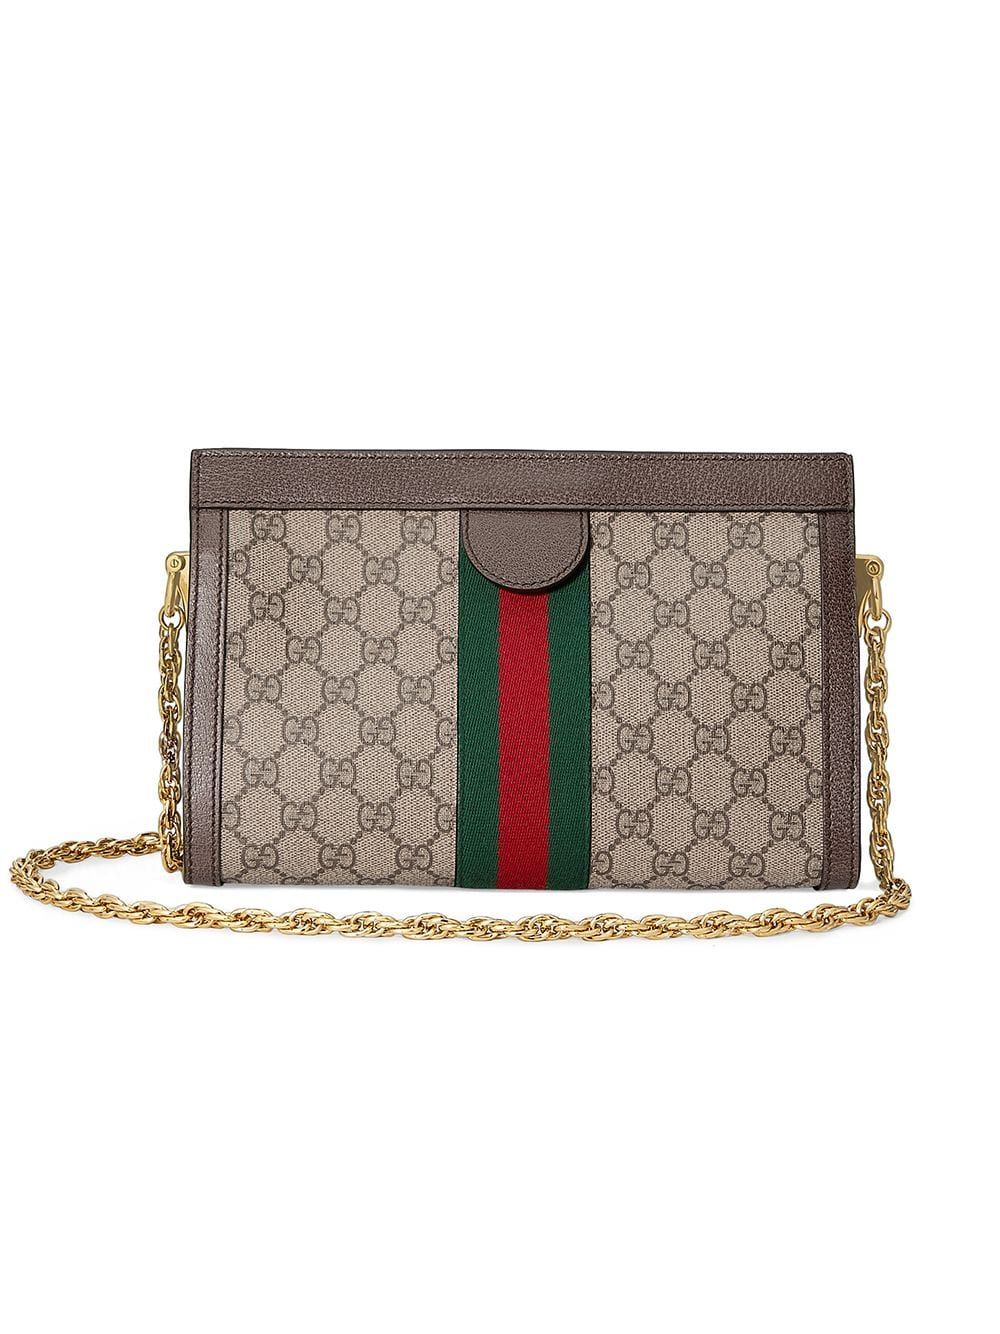 GUCCI Mini Ophidia GG Supreme Canvas Shoulder Bag in Tan with Chain Strap and Iconic Web Detail 26x17.5x8cm